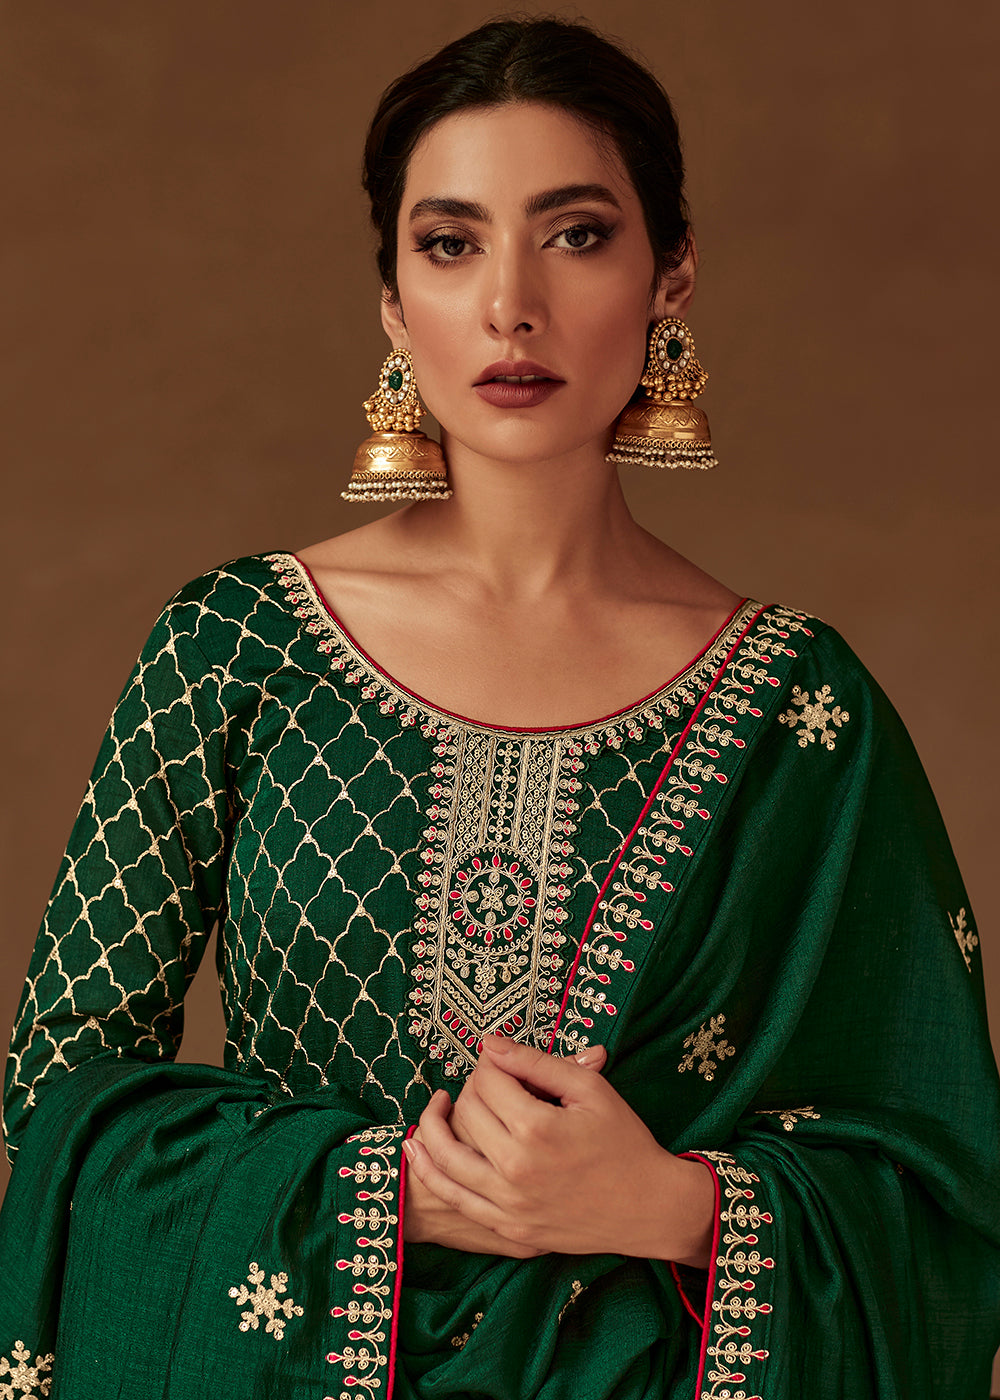 Buy Now Premium Silk Green & Gold Embroidered Indian Salwar Kameez Online in USA, UK, Canada & Worldwide at Empress Clothing. 